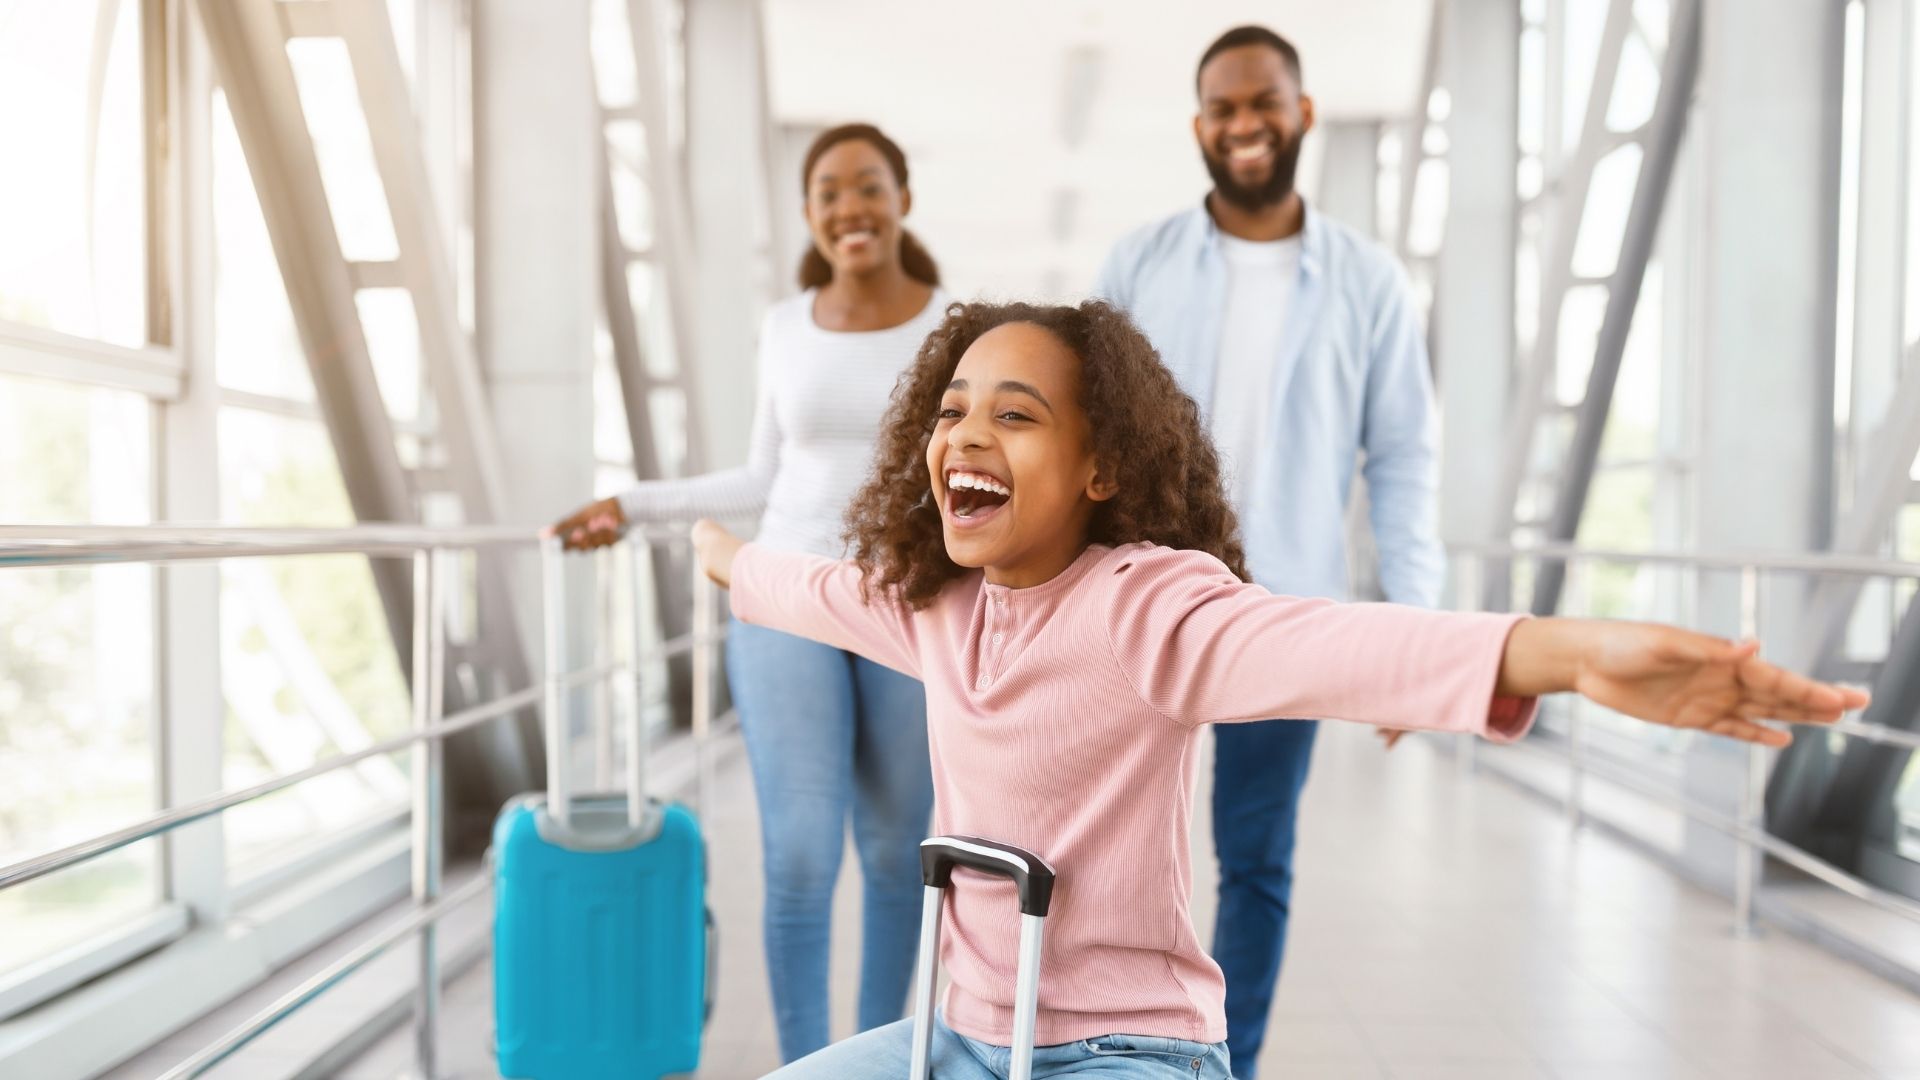 3 Tips for Planning Your Next Family Vacation